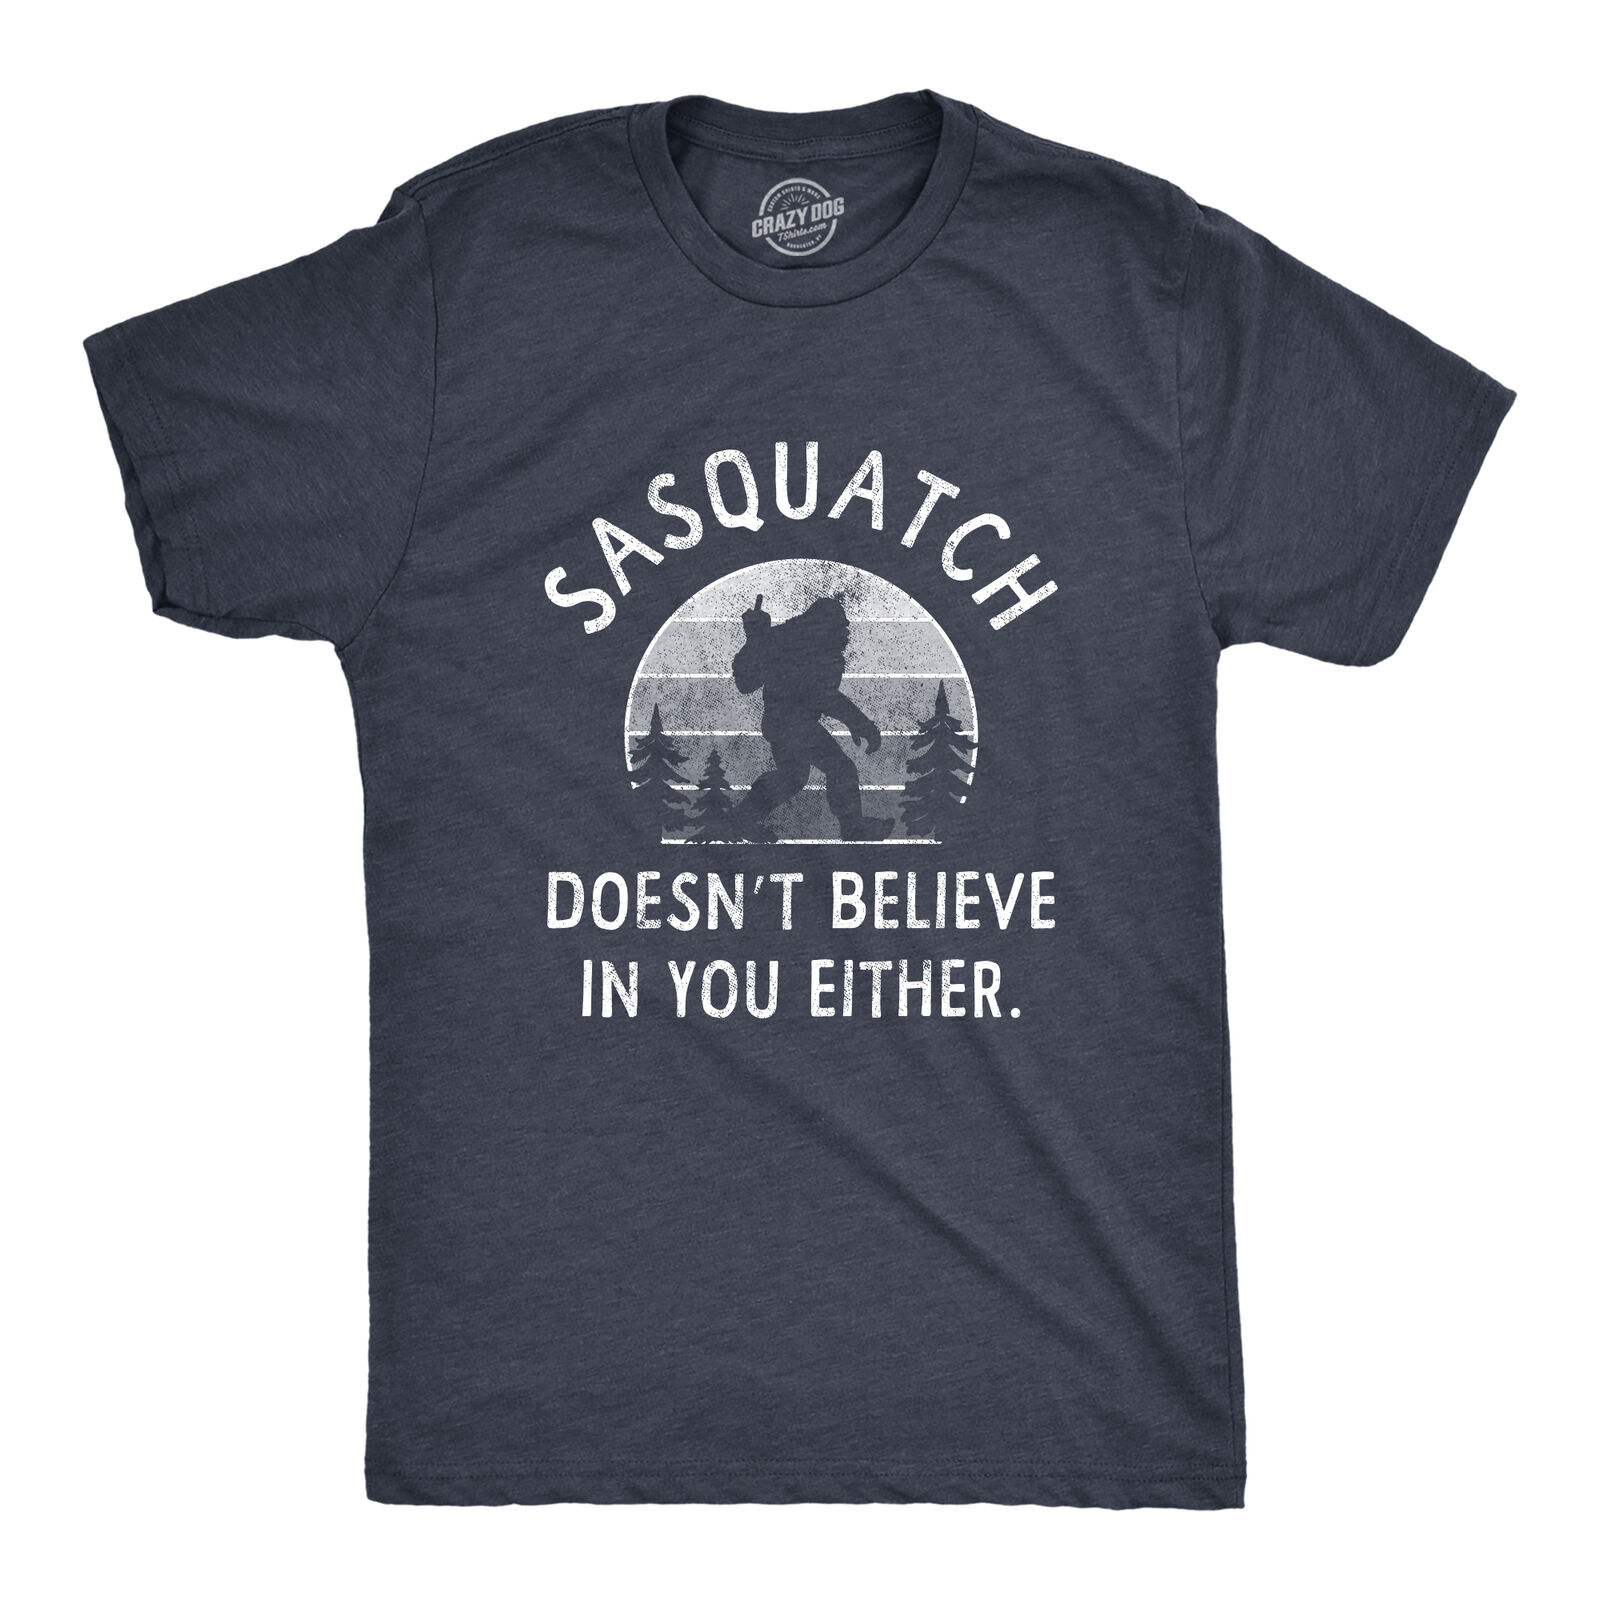 Mens Sasquatch Doesnt Believe In You Either T Shirt Funny Sarcastic Bigfoot Joke